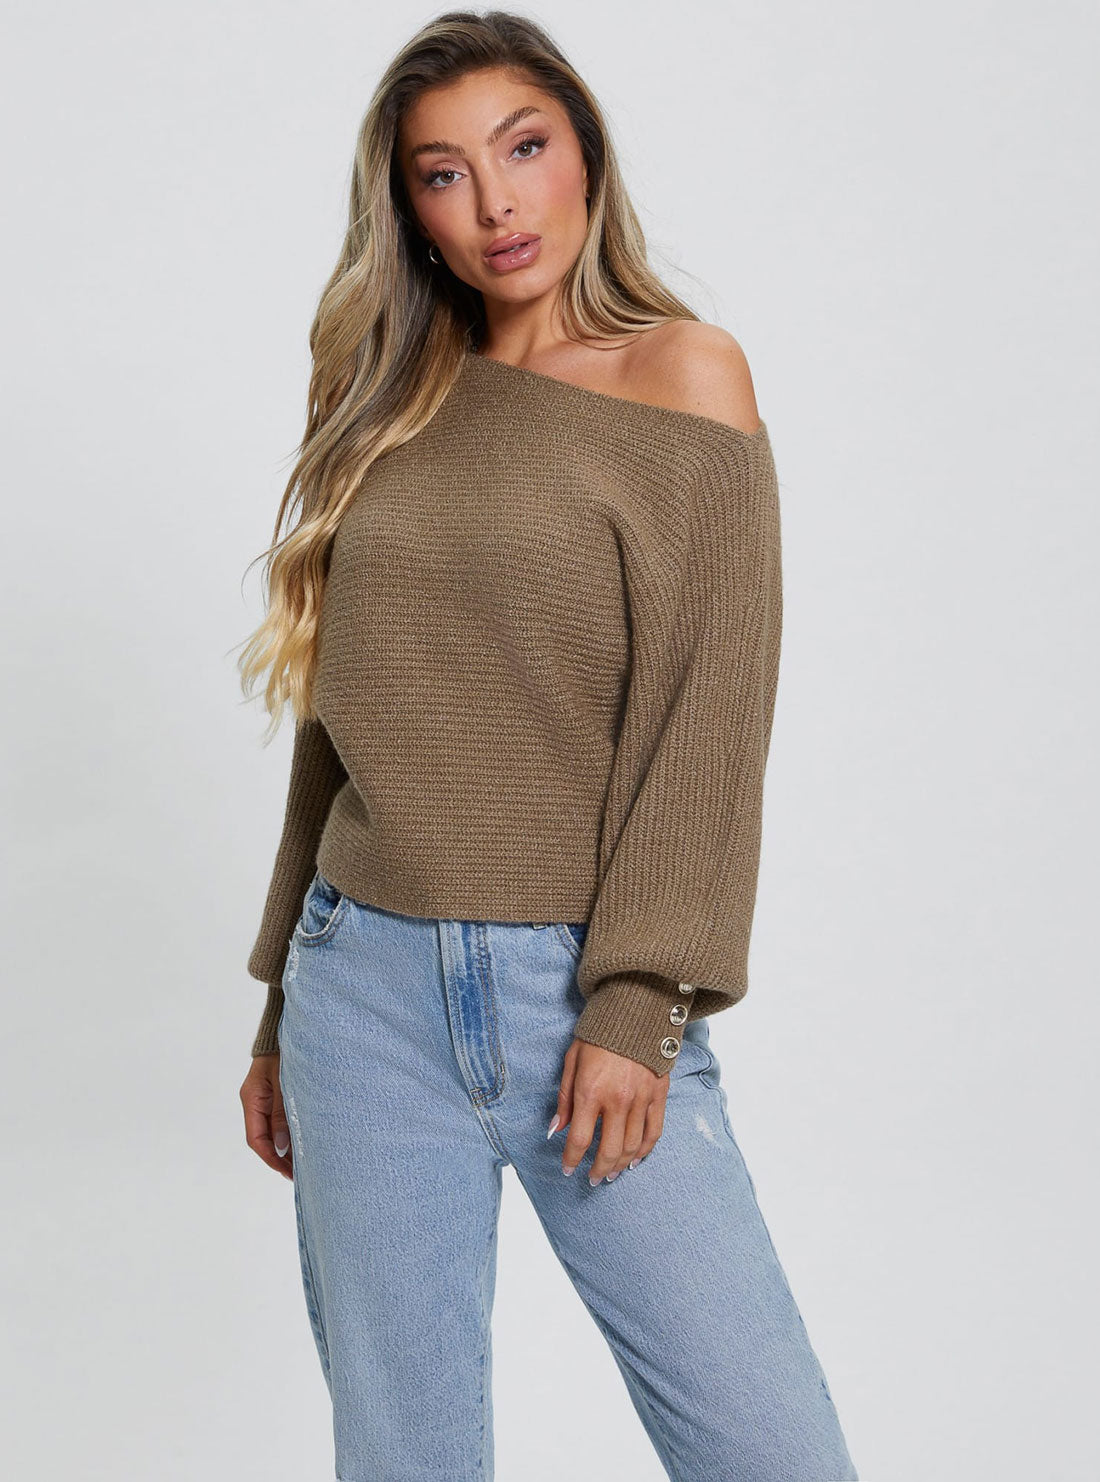 Brown Isadora Off-Shoulder Knit Top | GUESS Women's Apparel | front view